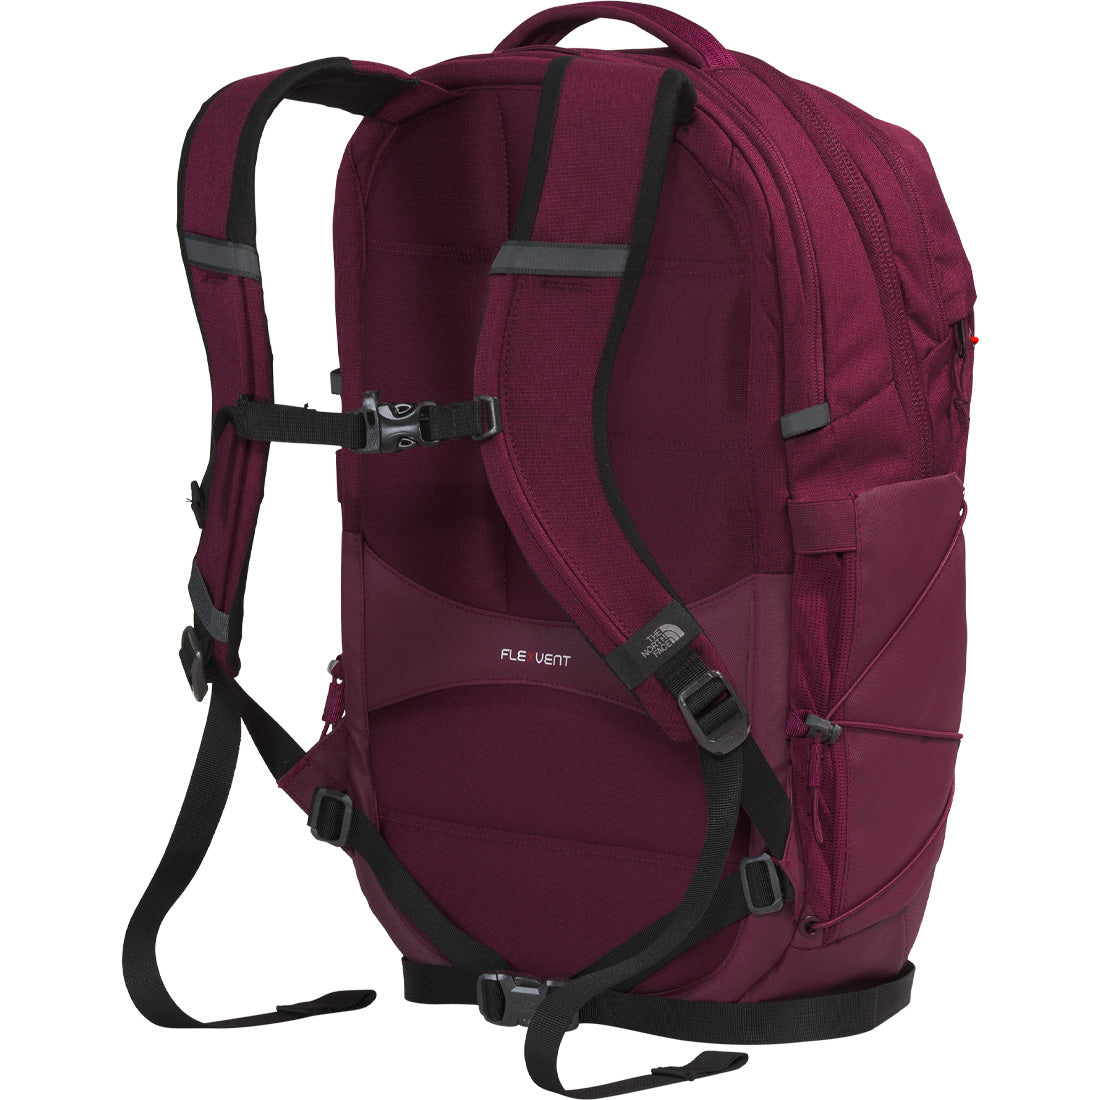 The North Face Borealis Backpack - Women's